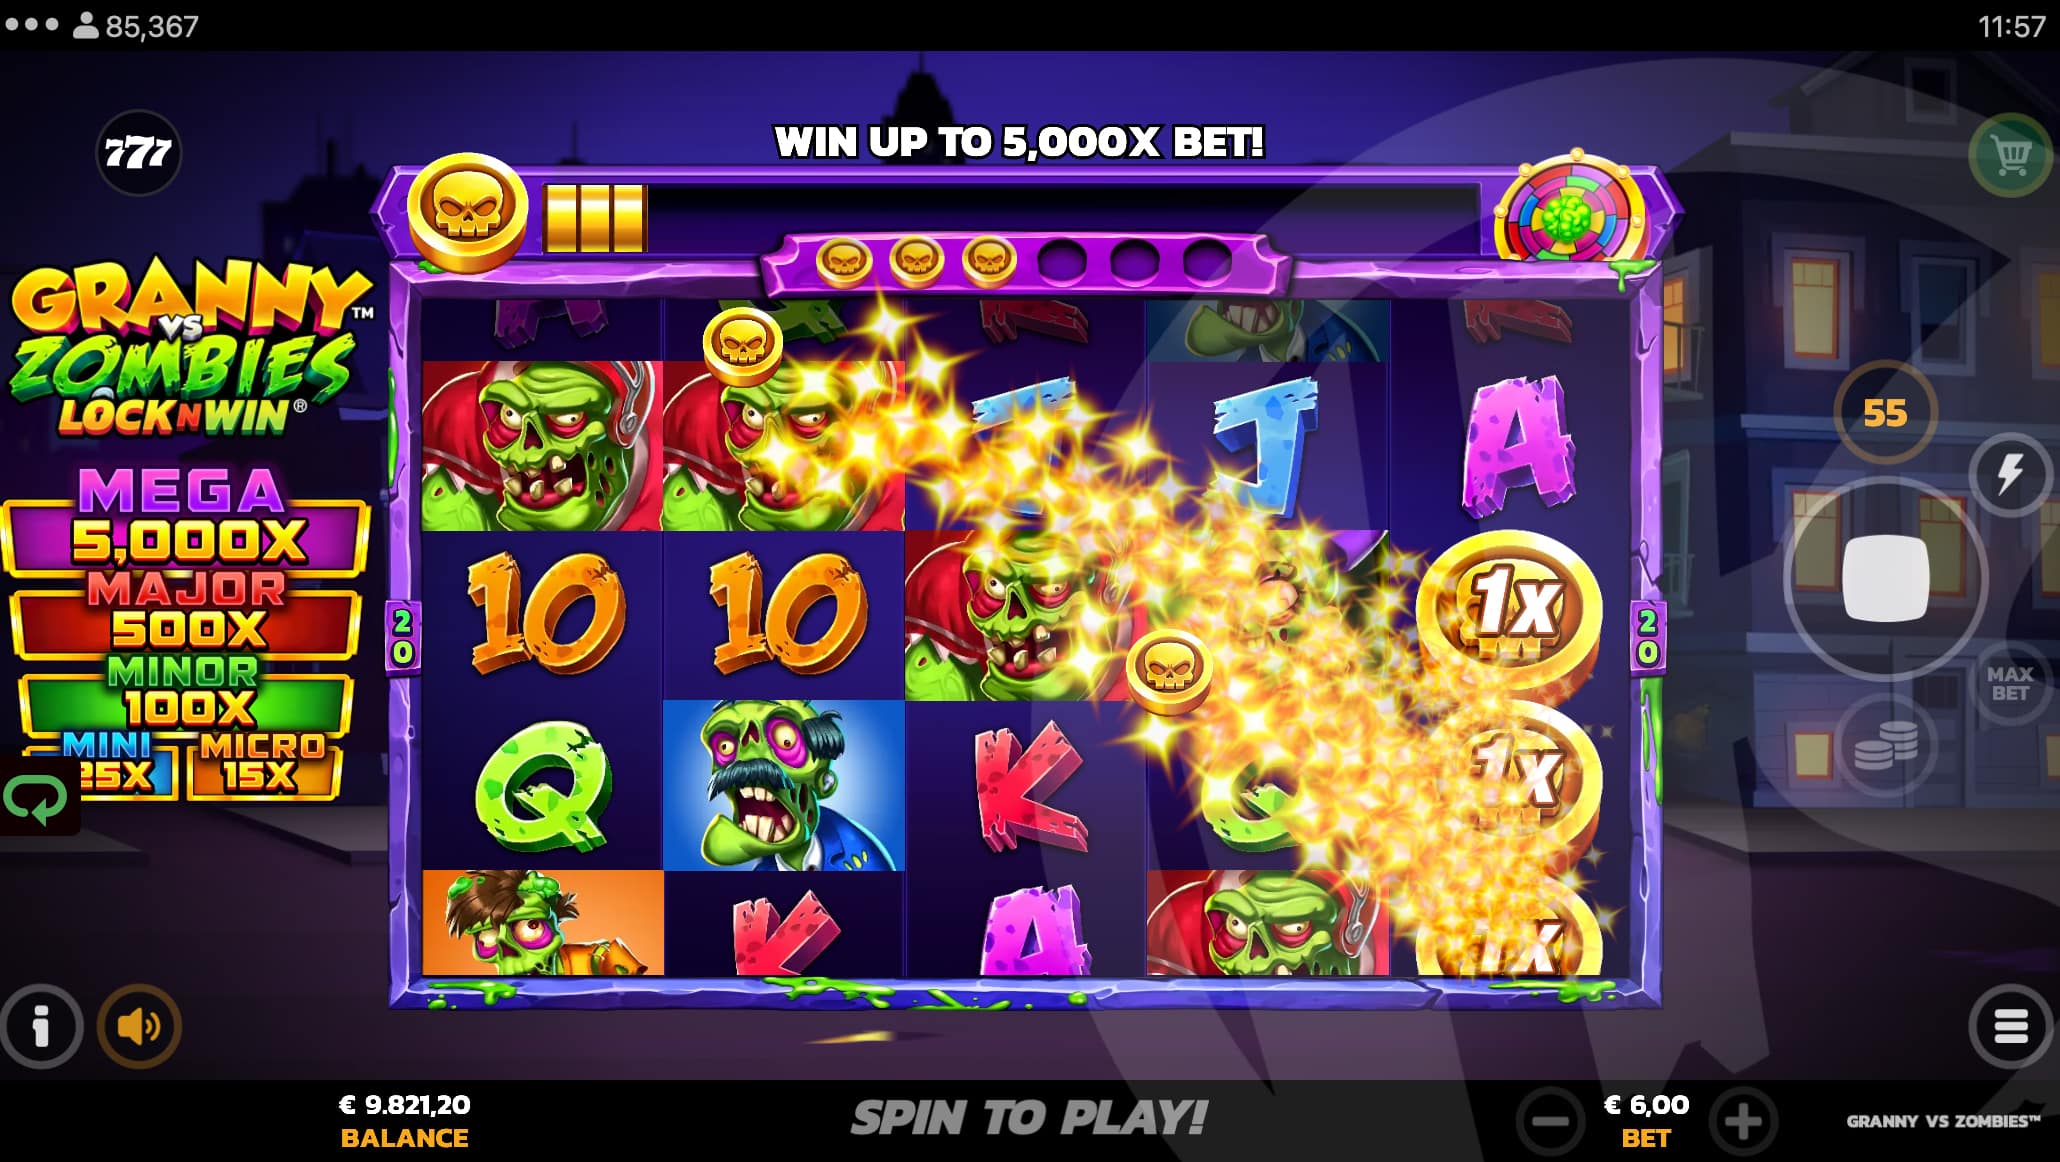 Collect Coins to Fill the Progress Bar and Trigger the Jackpot Wheel